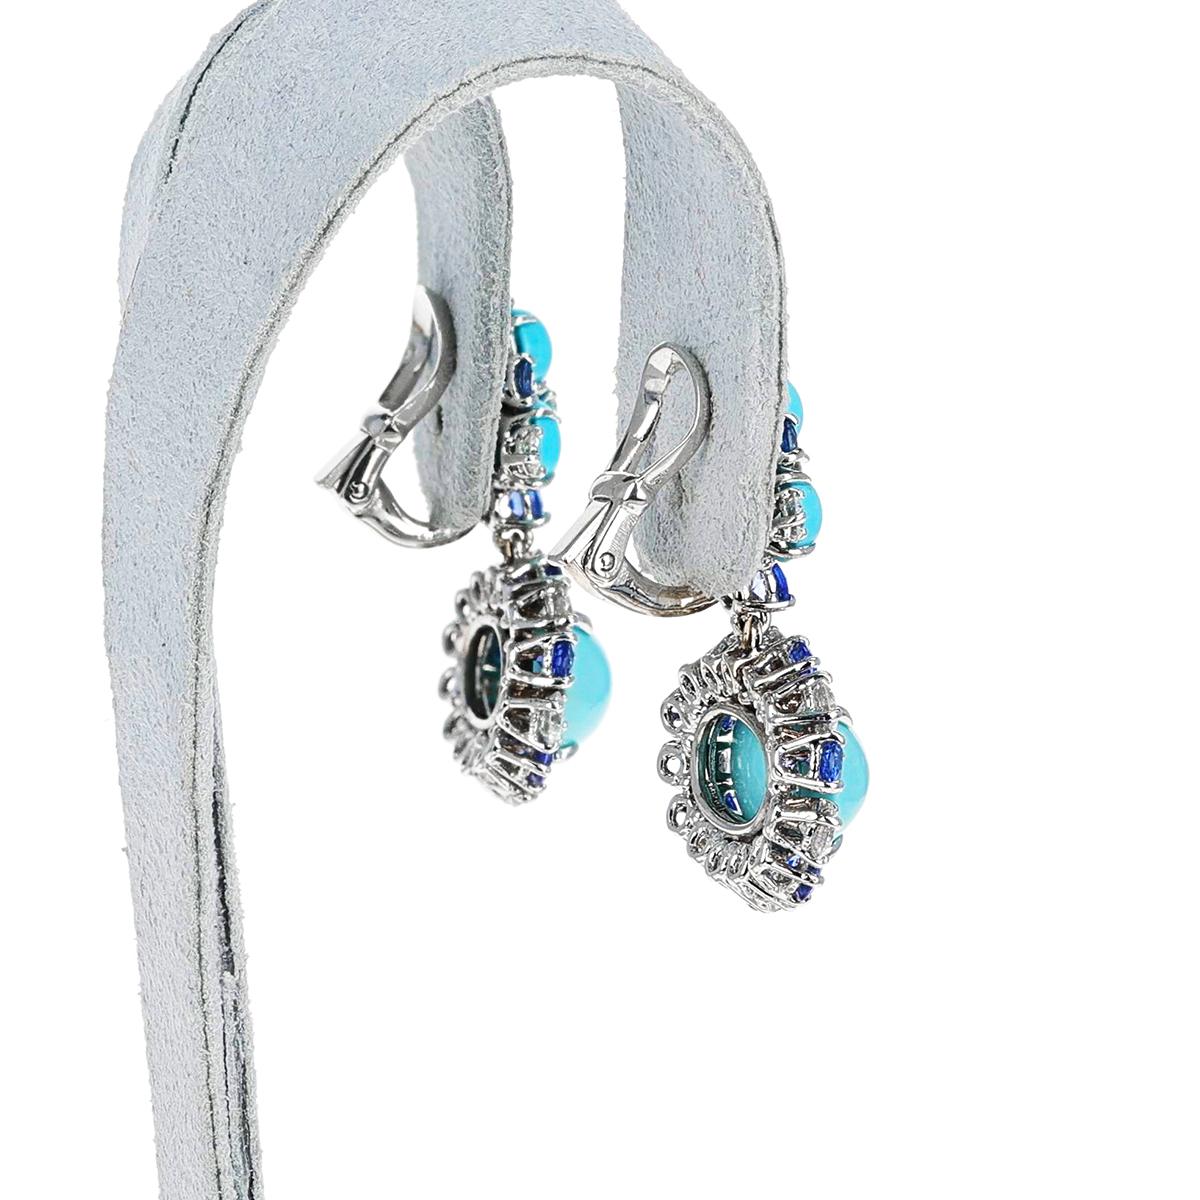 A Turquoise Cabochon, Sapphire and Diamond Dangling Earrings, 18k. The total weight of the earrings is 14.24 grams. Length is 1.30